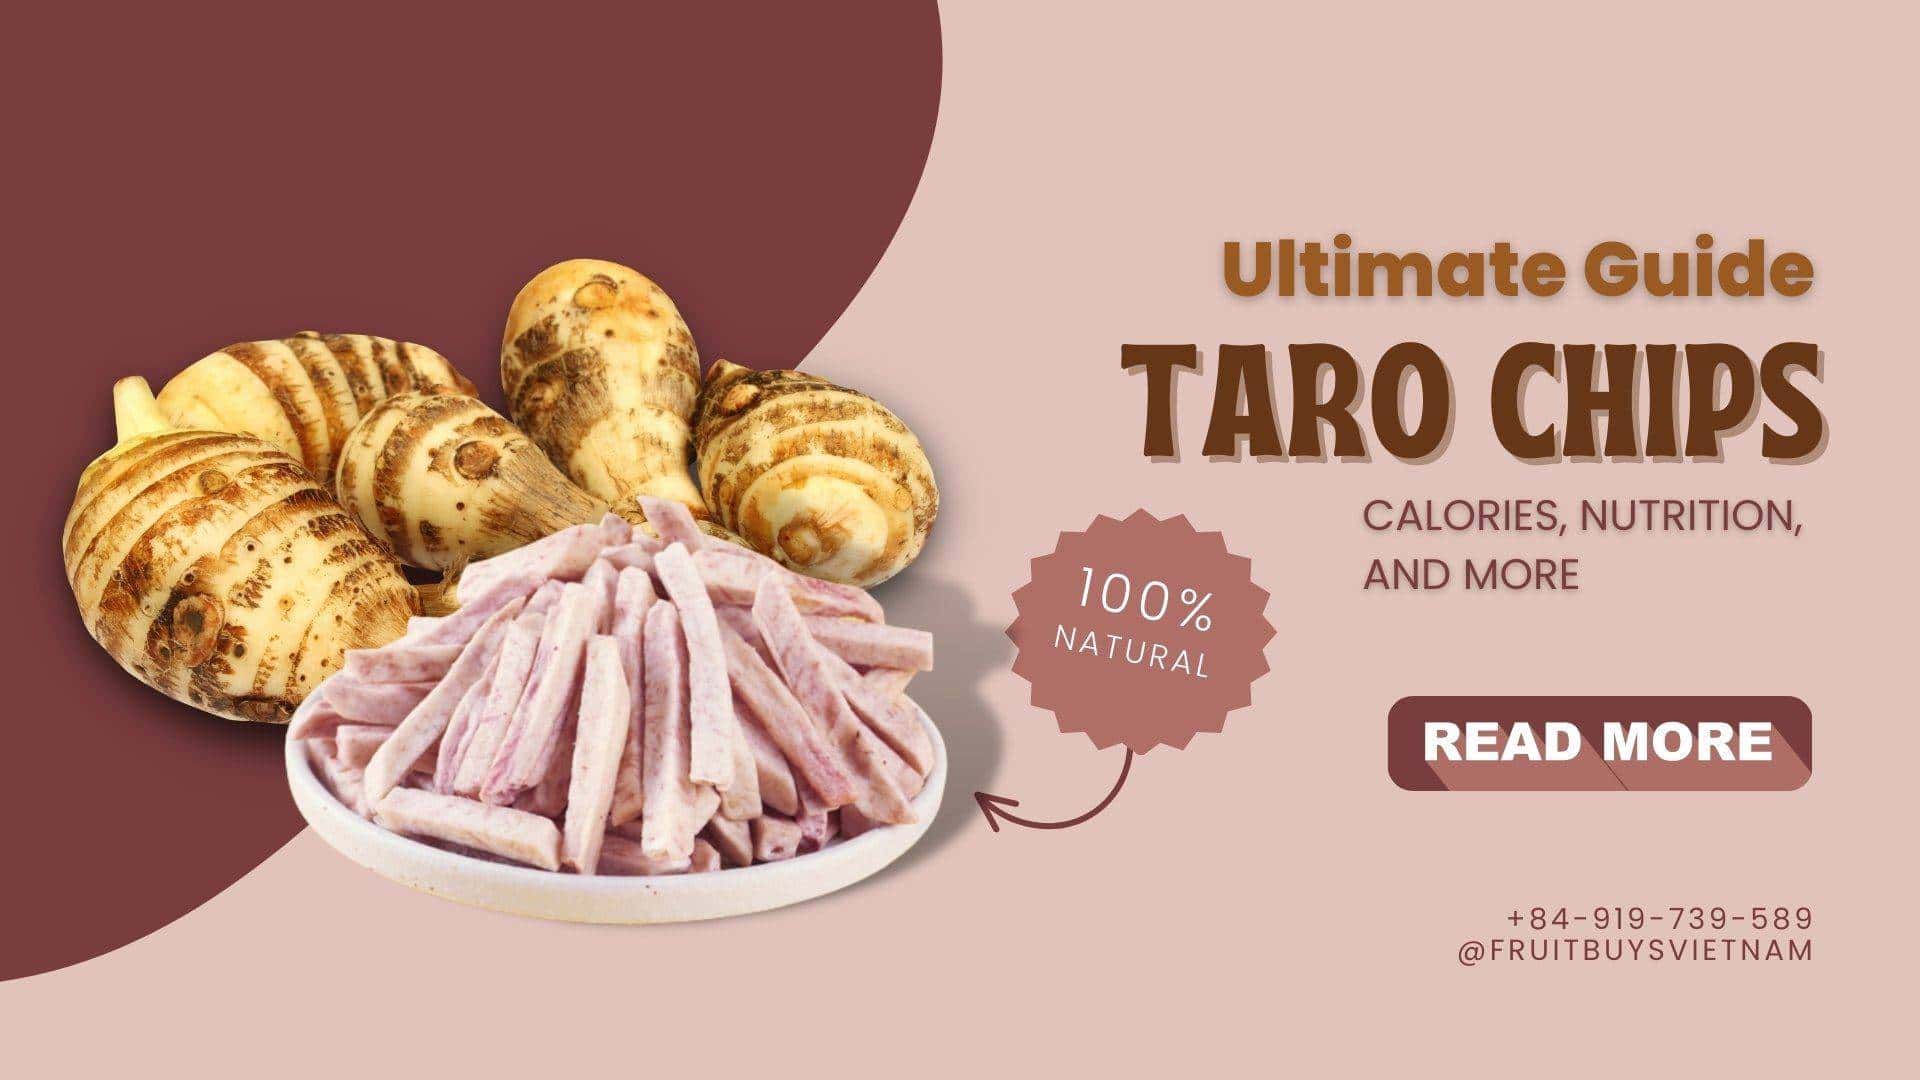 The Ultimate Guide To Taro Chips: Calories, Nutrition, And More - FruitBuys  Vietnam